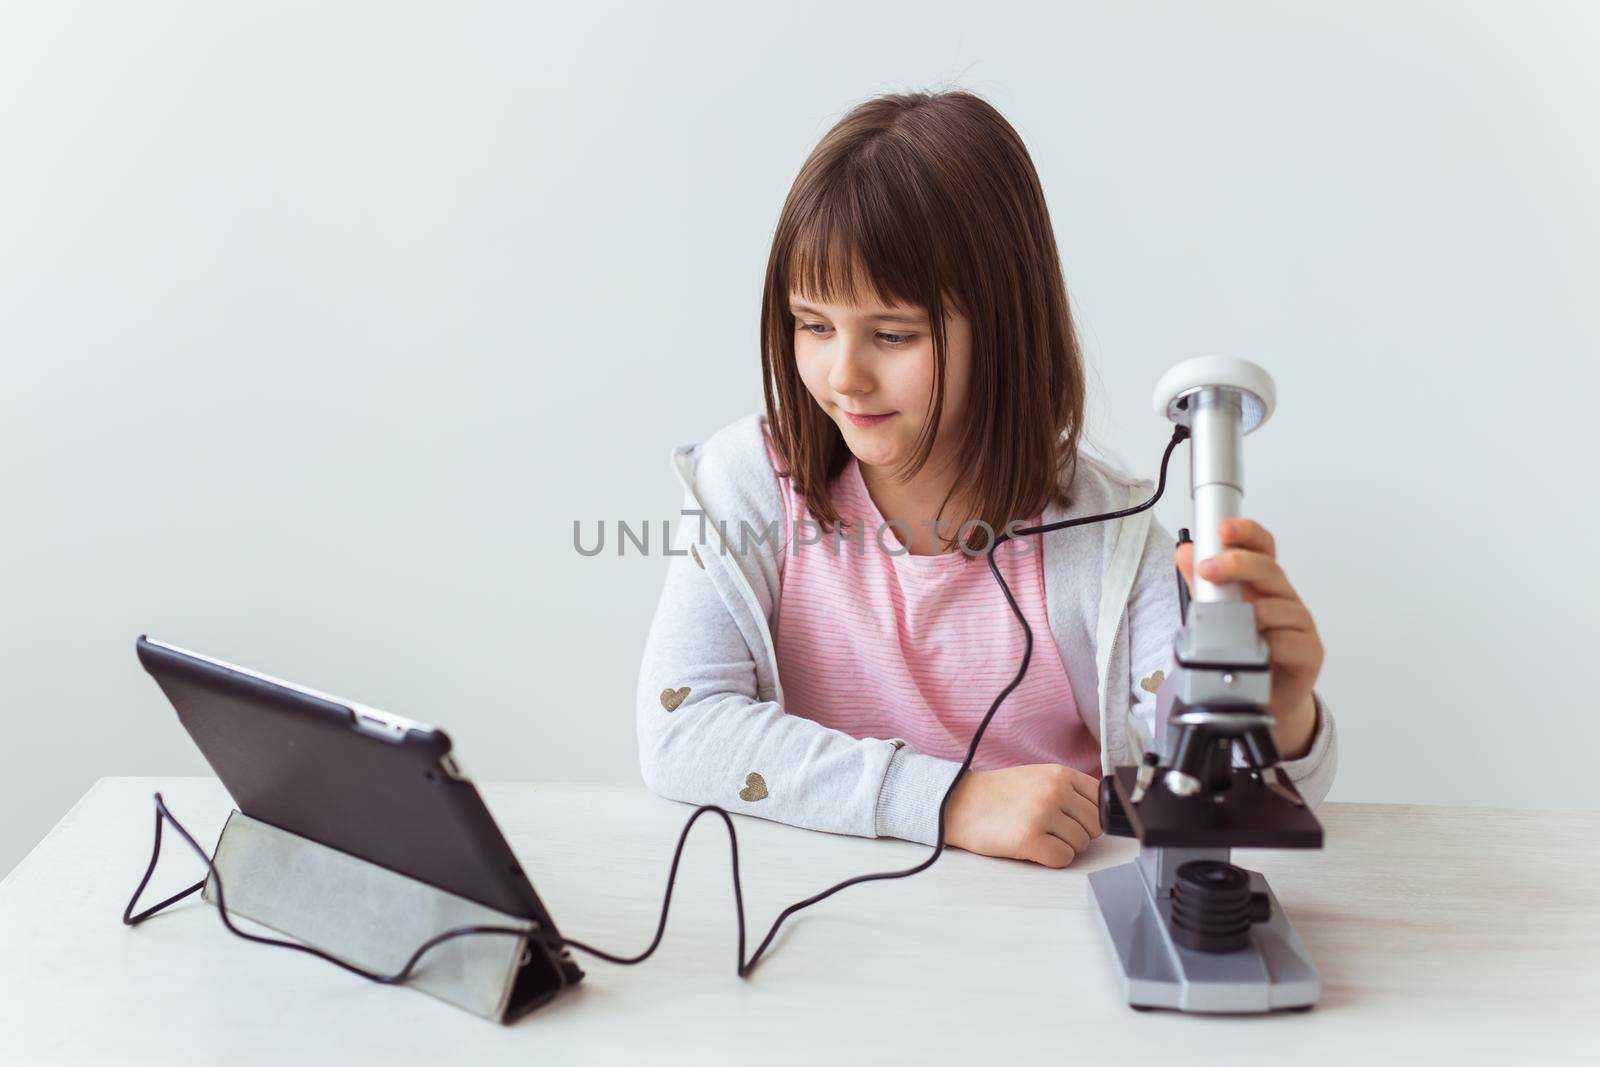 Portrait of cute little child doing homework with a digital microscope. Technologies, science and children concept. by Satura86